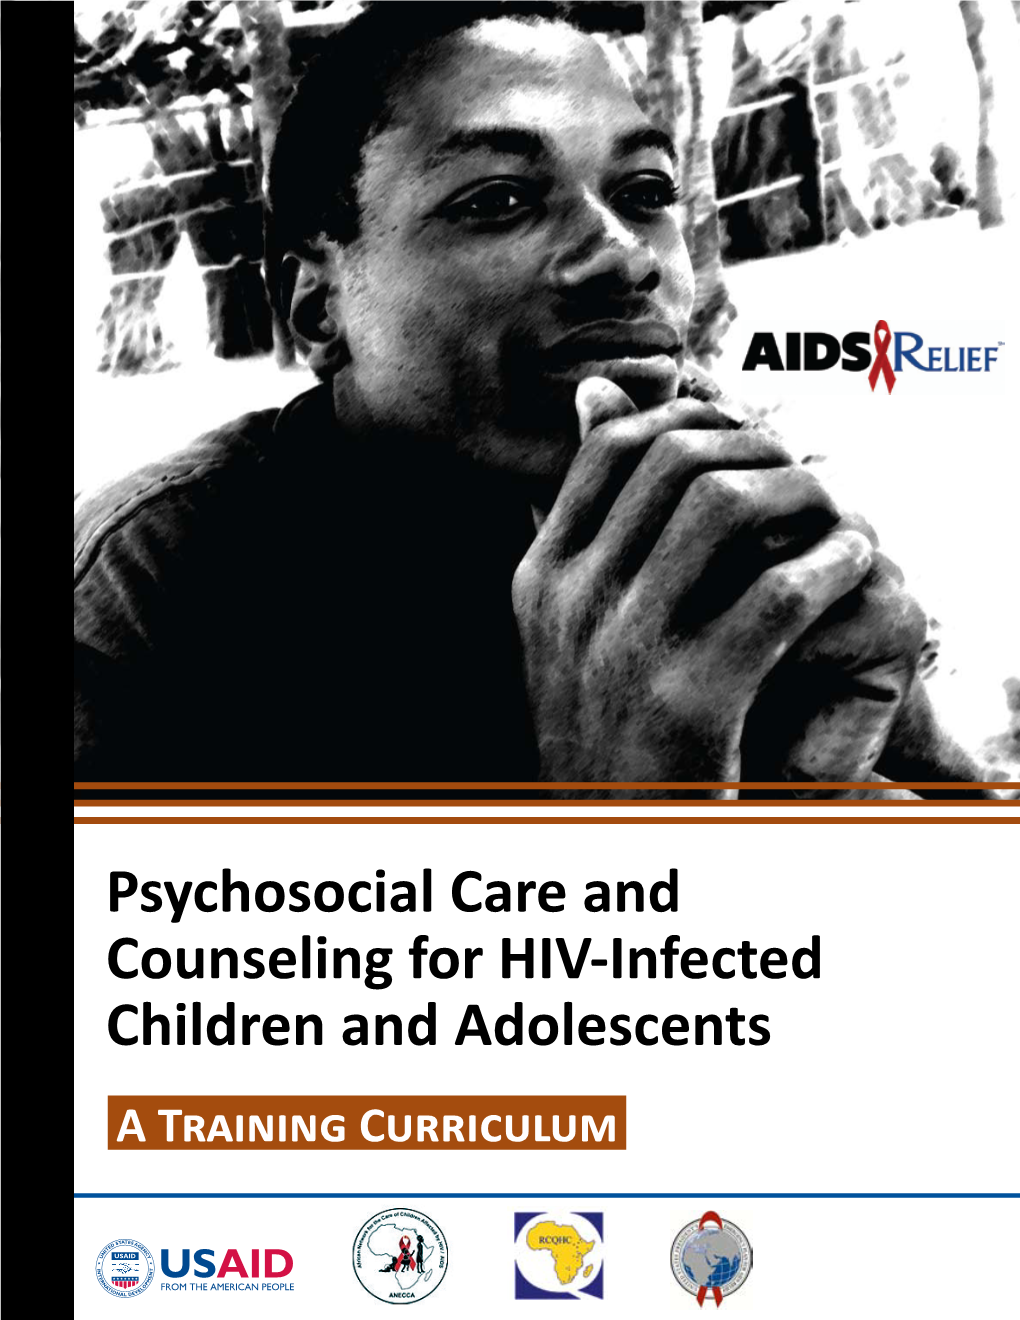 Psychosocial Care and Counseling for HIV-Infected Children and Adolescents a Training Curriculum